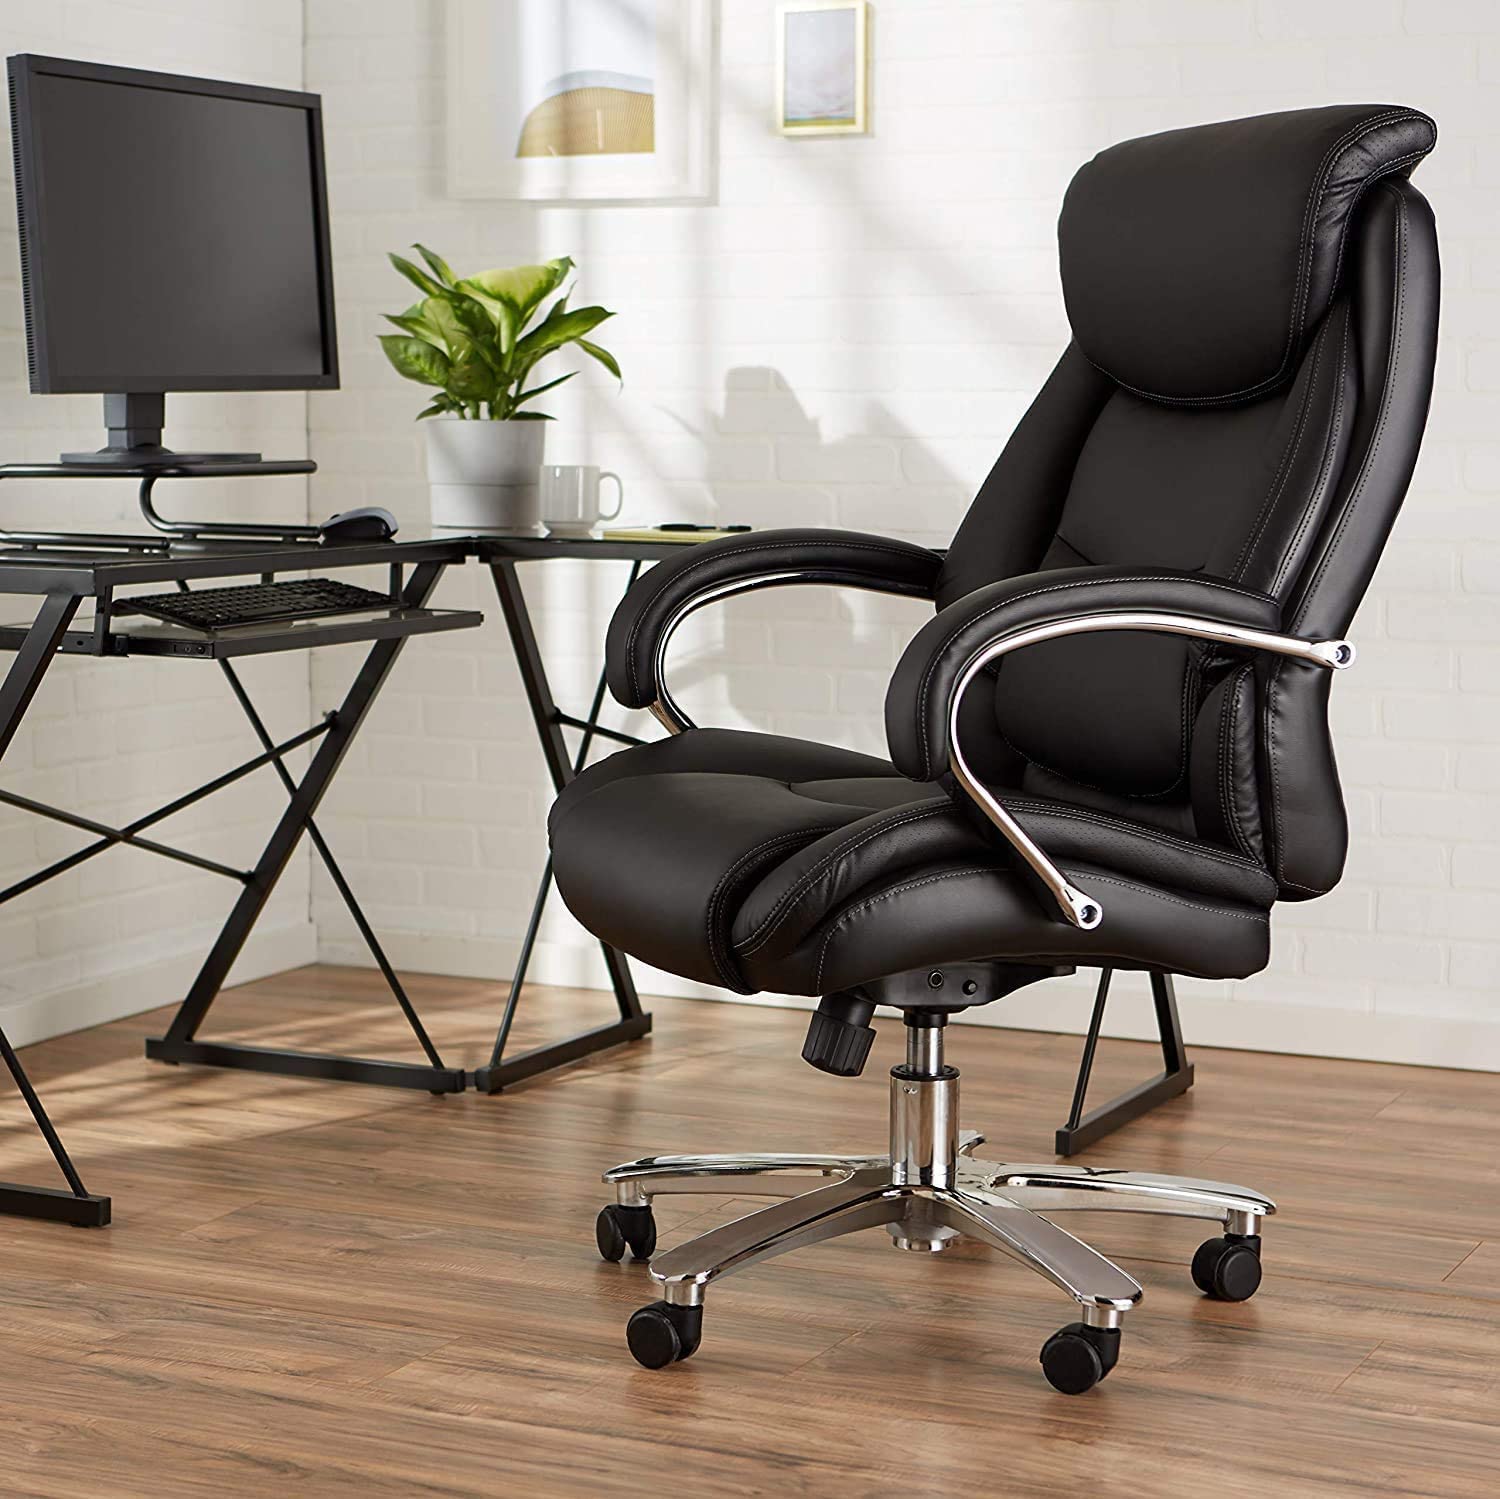 Office Chair Ergonomic High Back Executive Chair, Adjustable Height Home Desk Chair for Lumbar Support